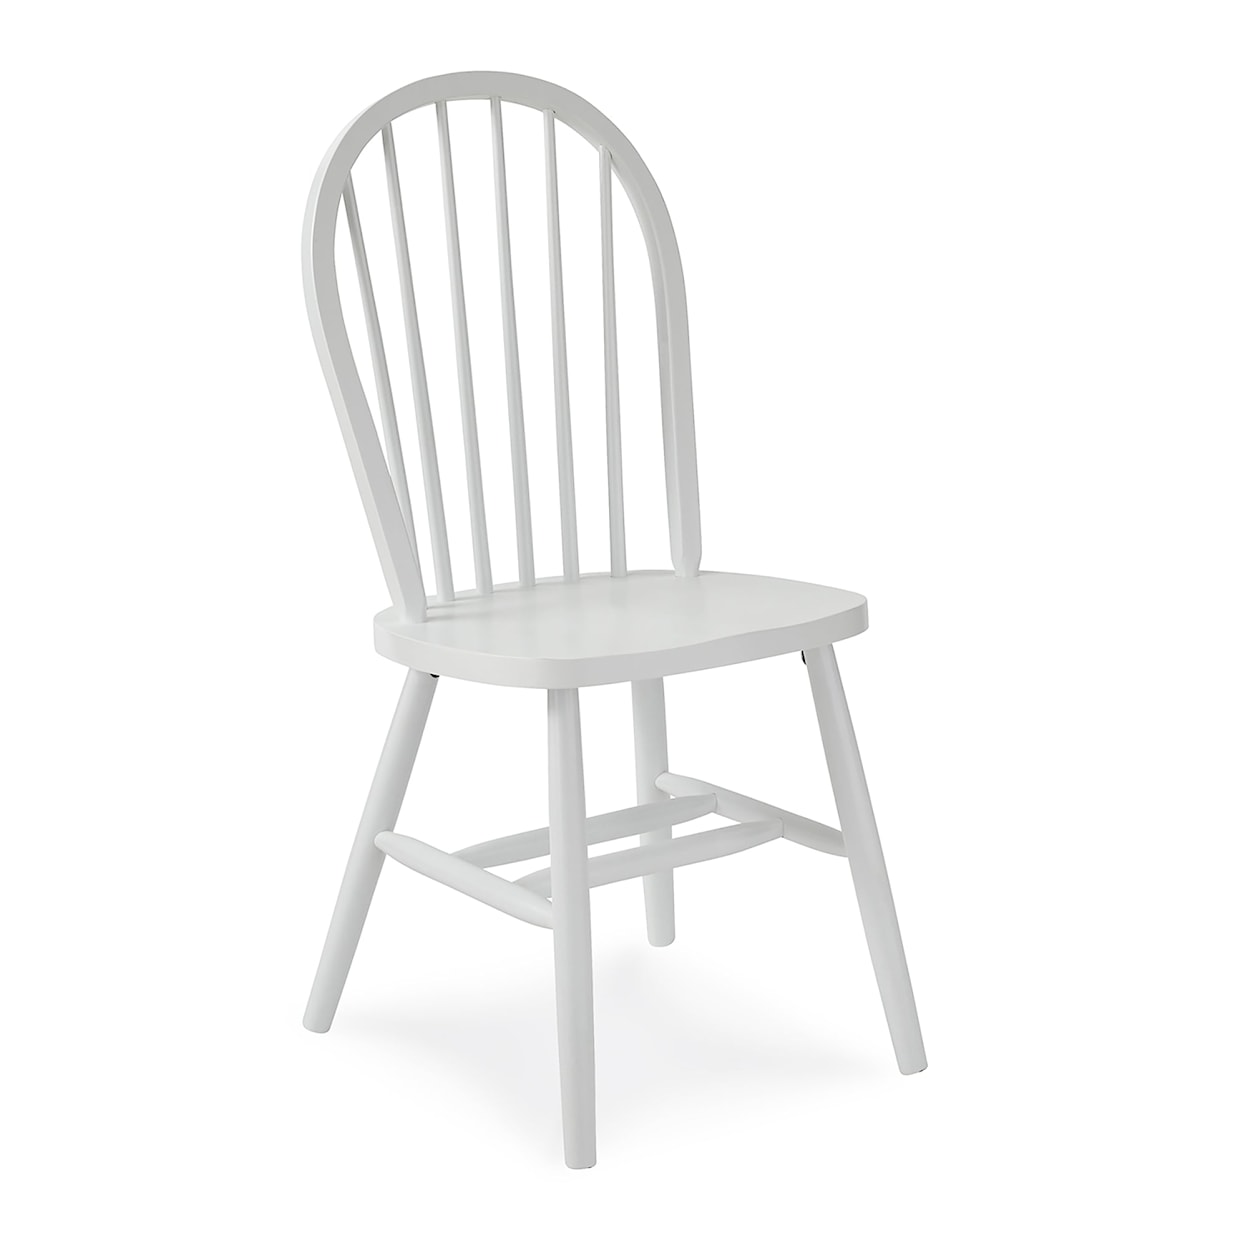 John Thomas Dining Essentials Windsor Chair in Pure White